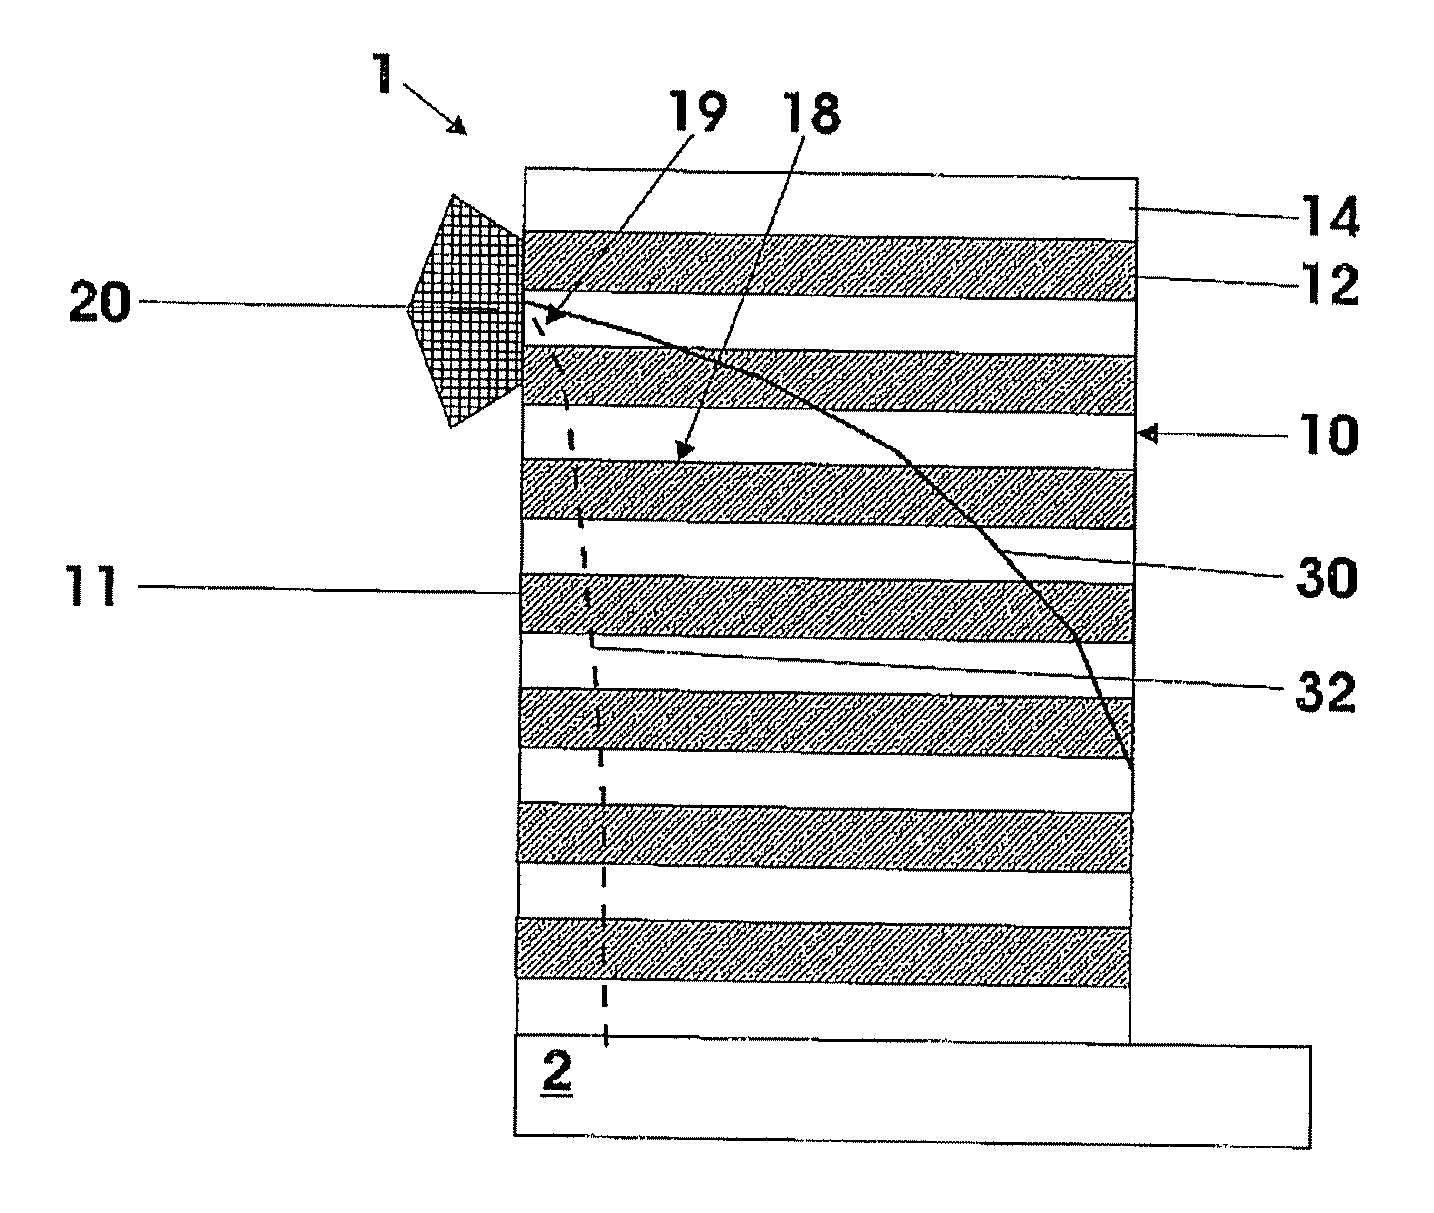 Layered electrically conductive material